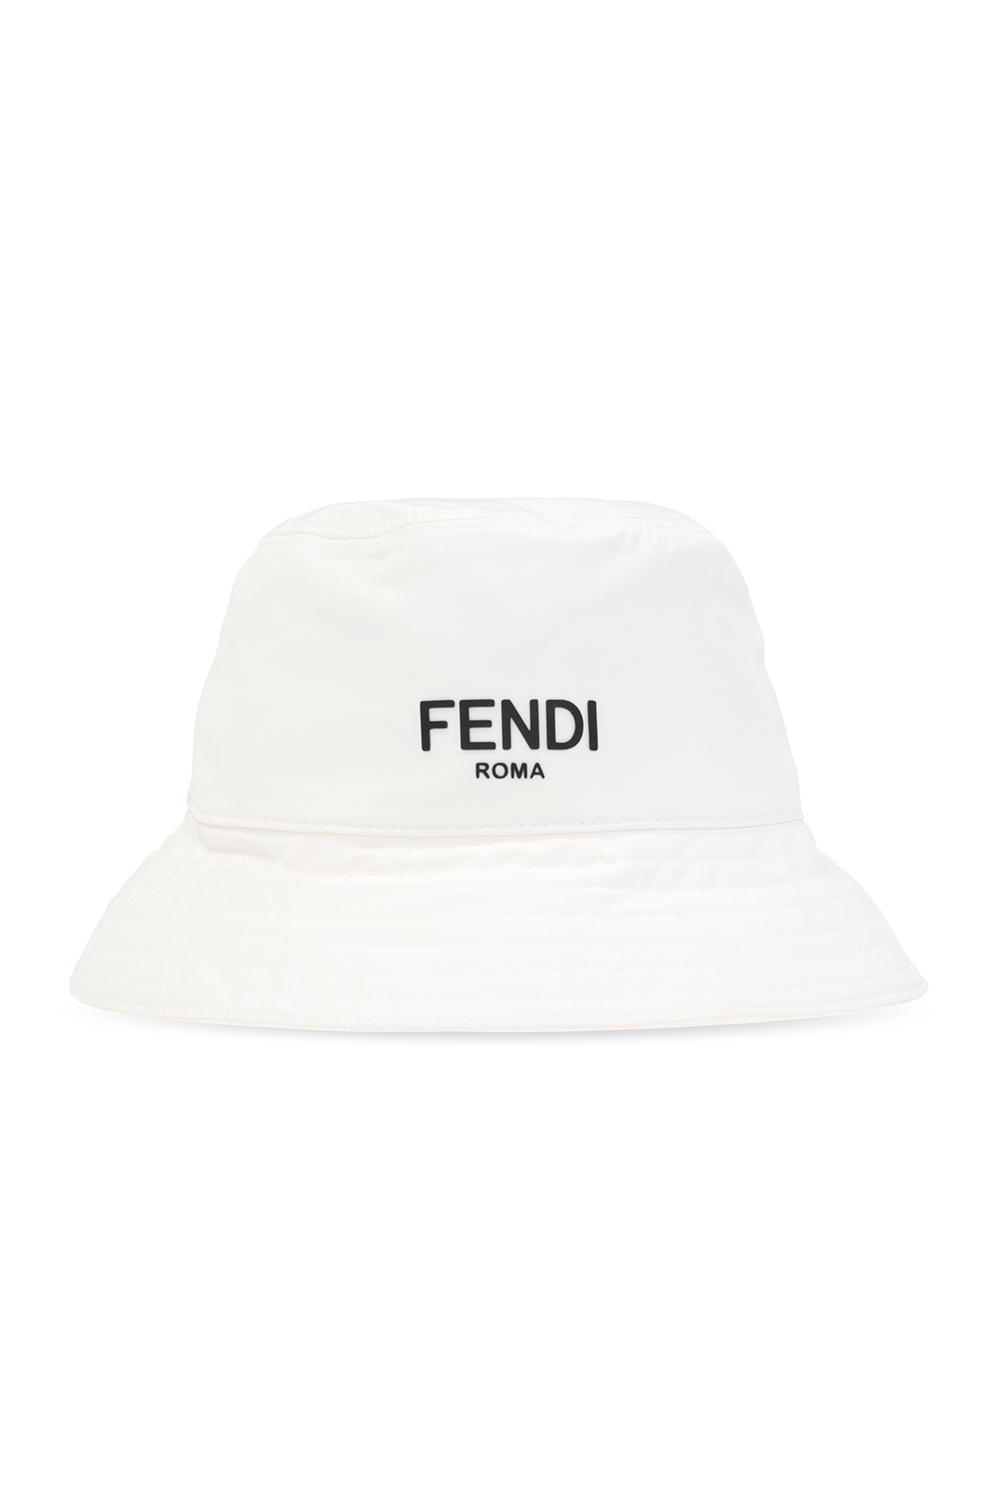 Fendi Kids the cat in the NAKED hat by dr seuss